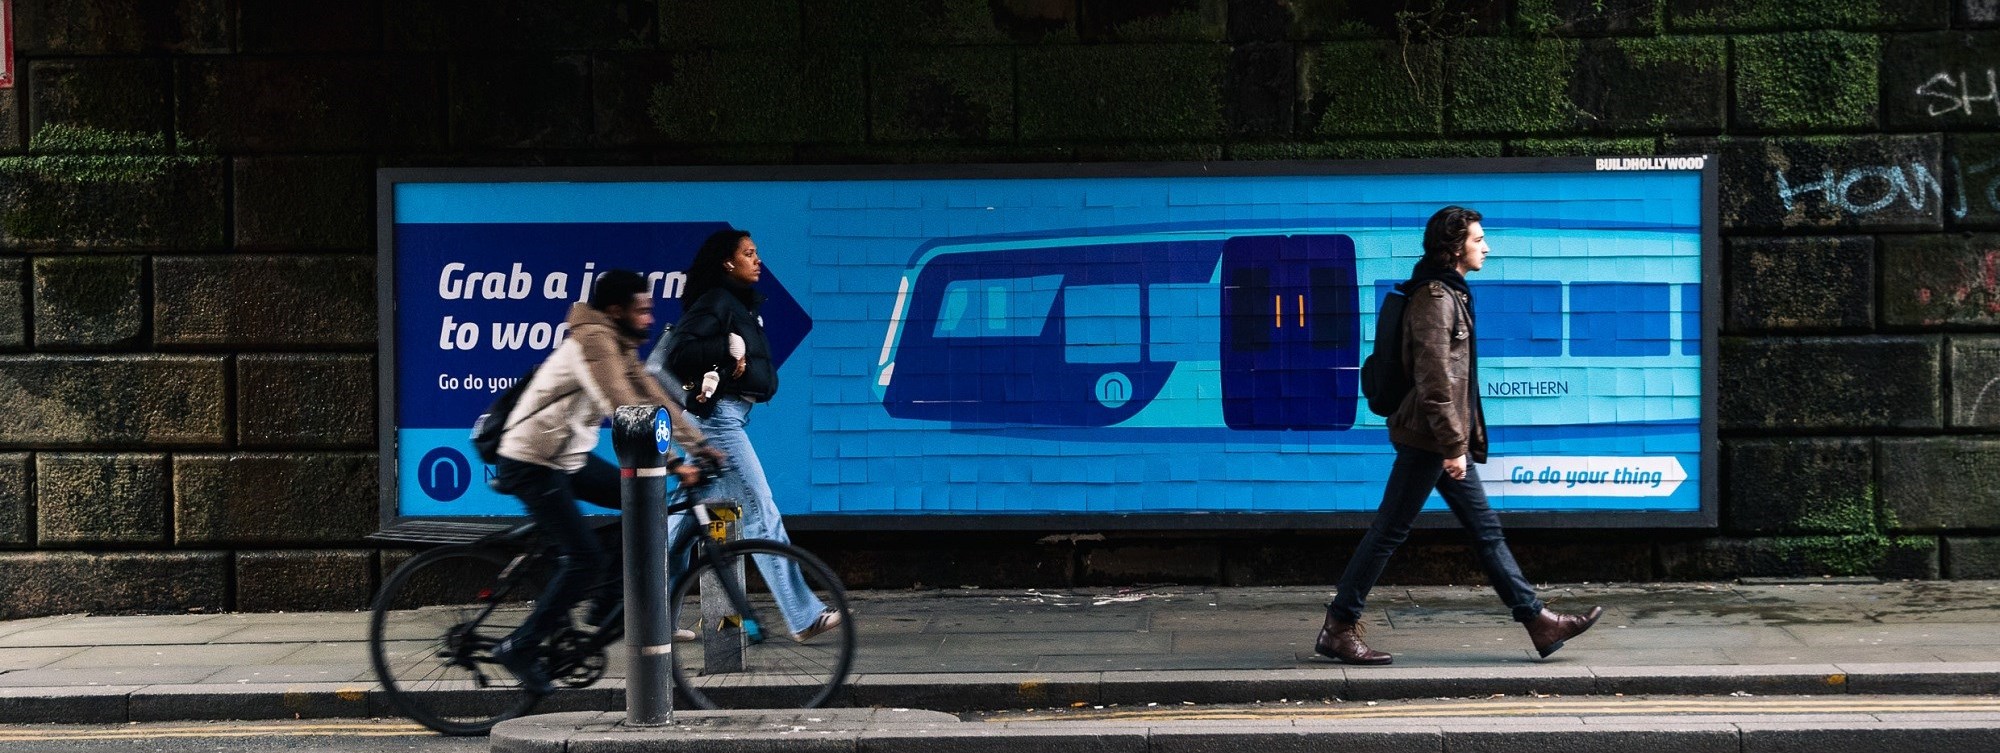 image-shows-try-the-train-billboard-on-manchester-oxford-road